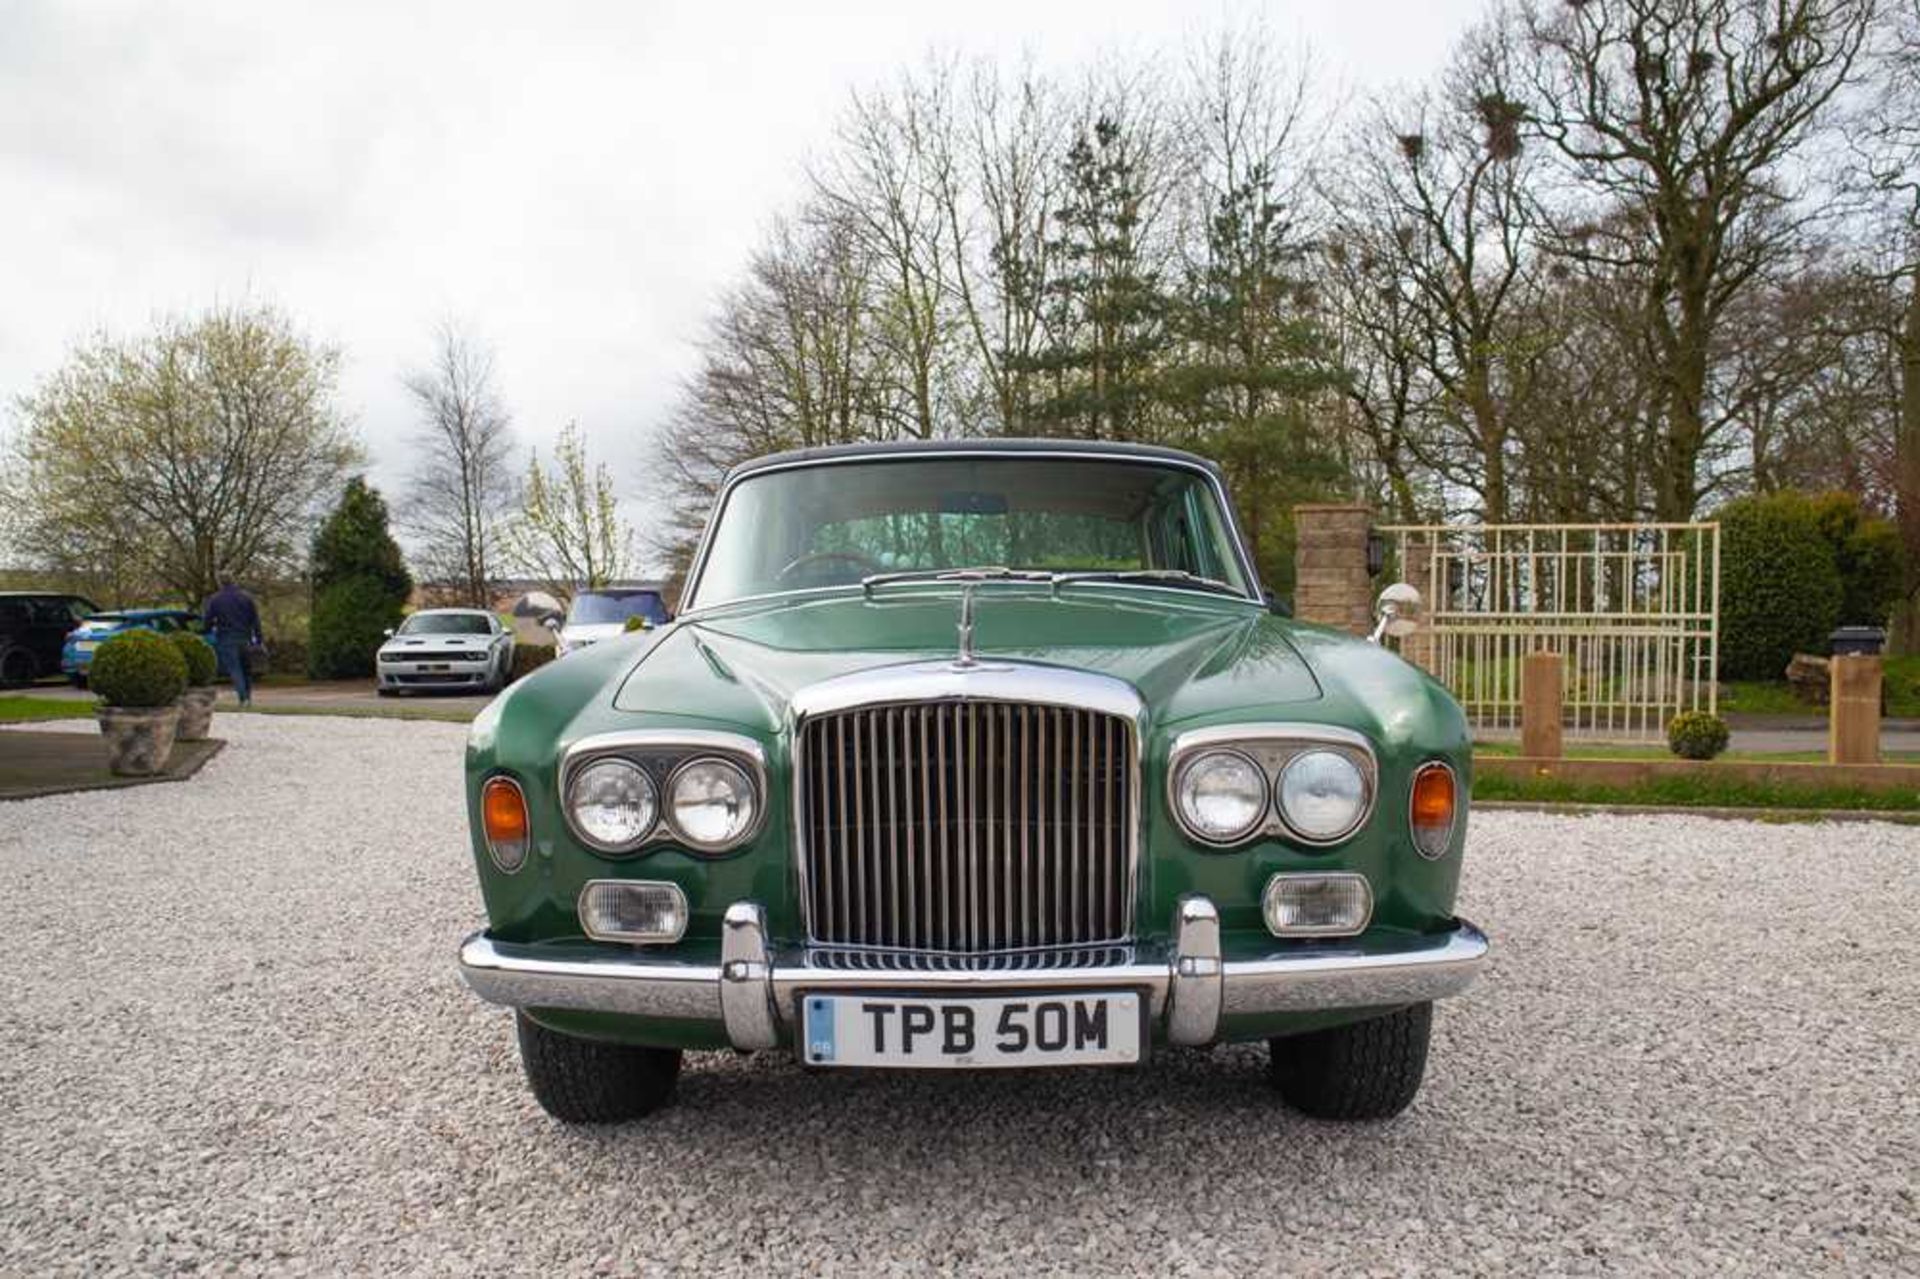 1973 Bentley T-Series Saloon Formerly part of the Dr James Hull and Jaguar Land Rover collections - Image 9 of 22